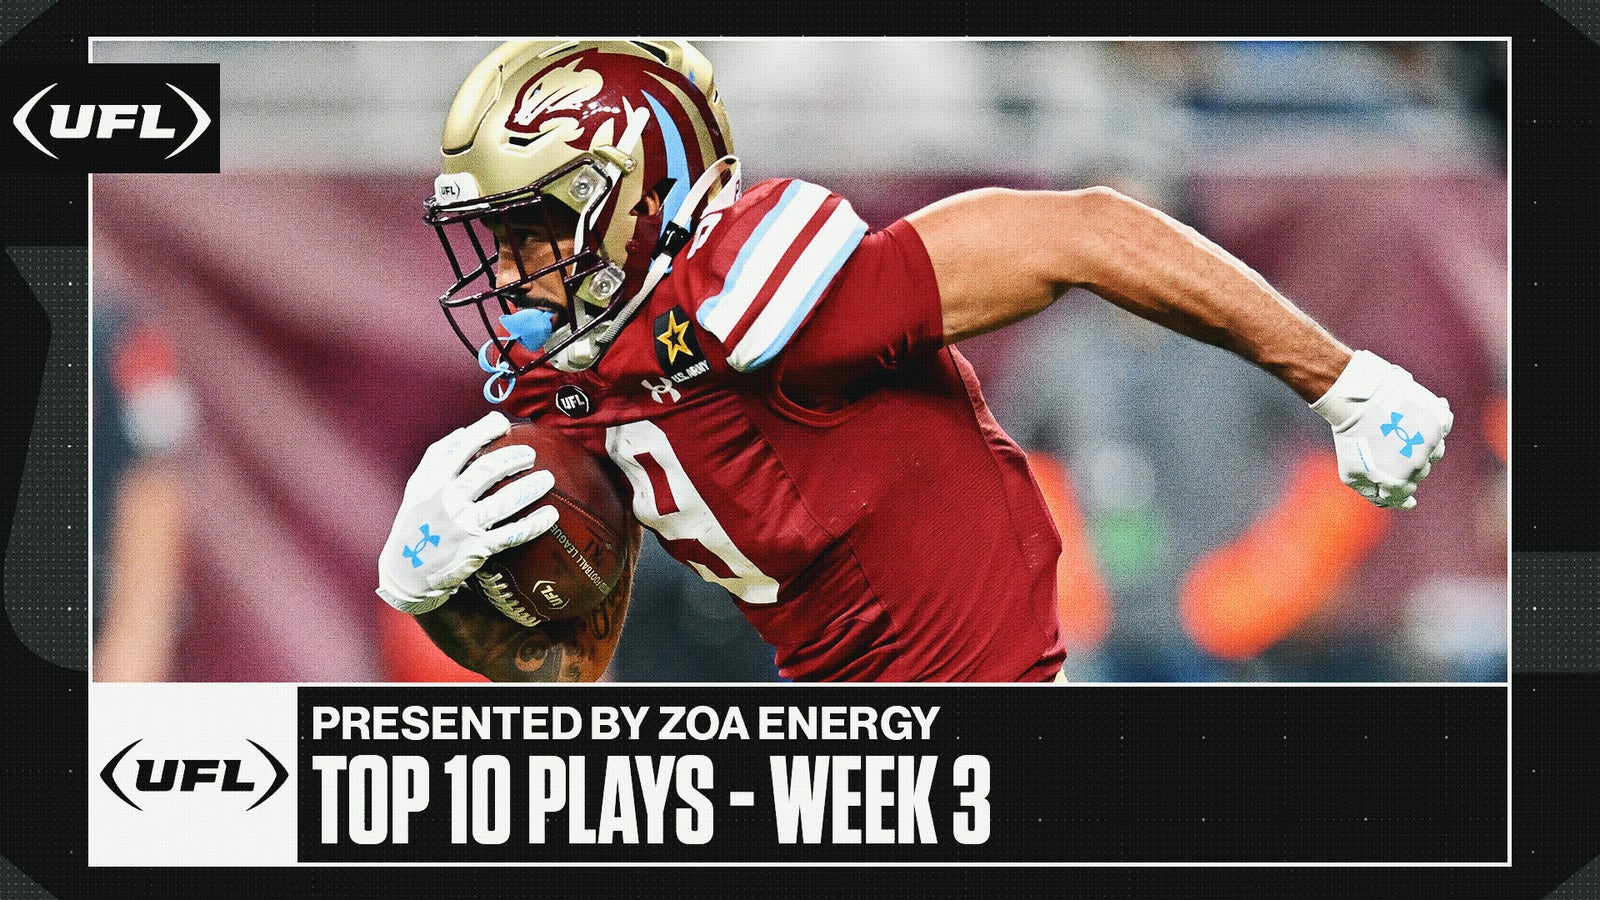 UFL Top 10 Plays from Week 3 presented by ZOA Energy